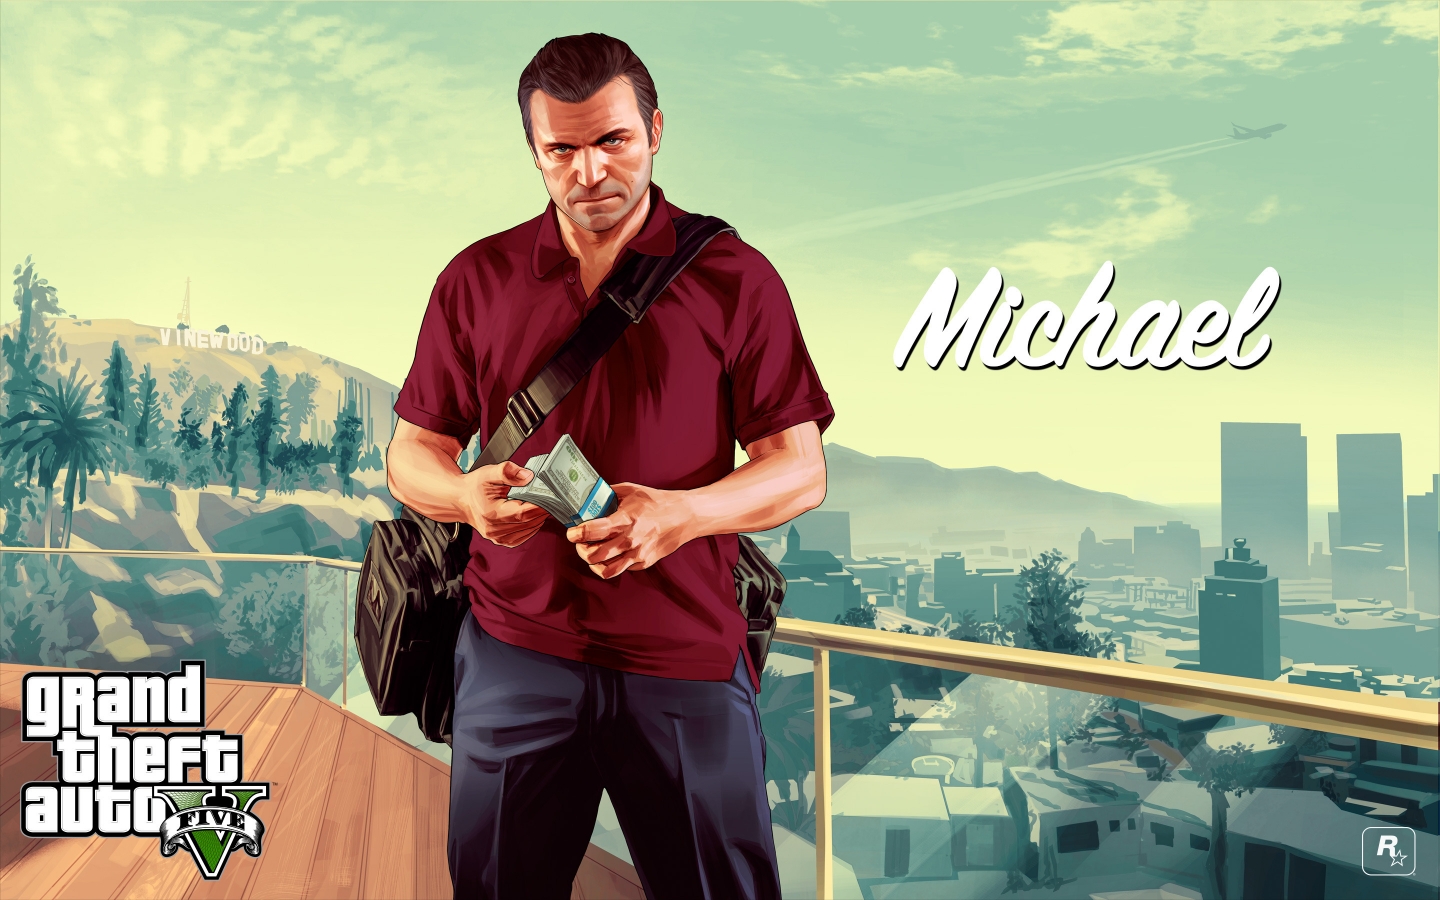 Michael with Money GTA V for 1440 x 900 widescreen resolution